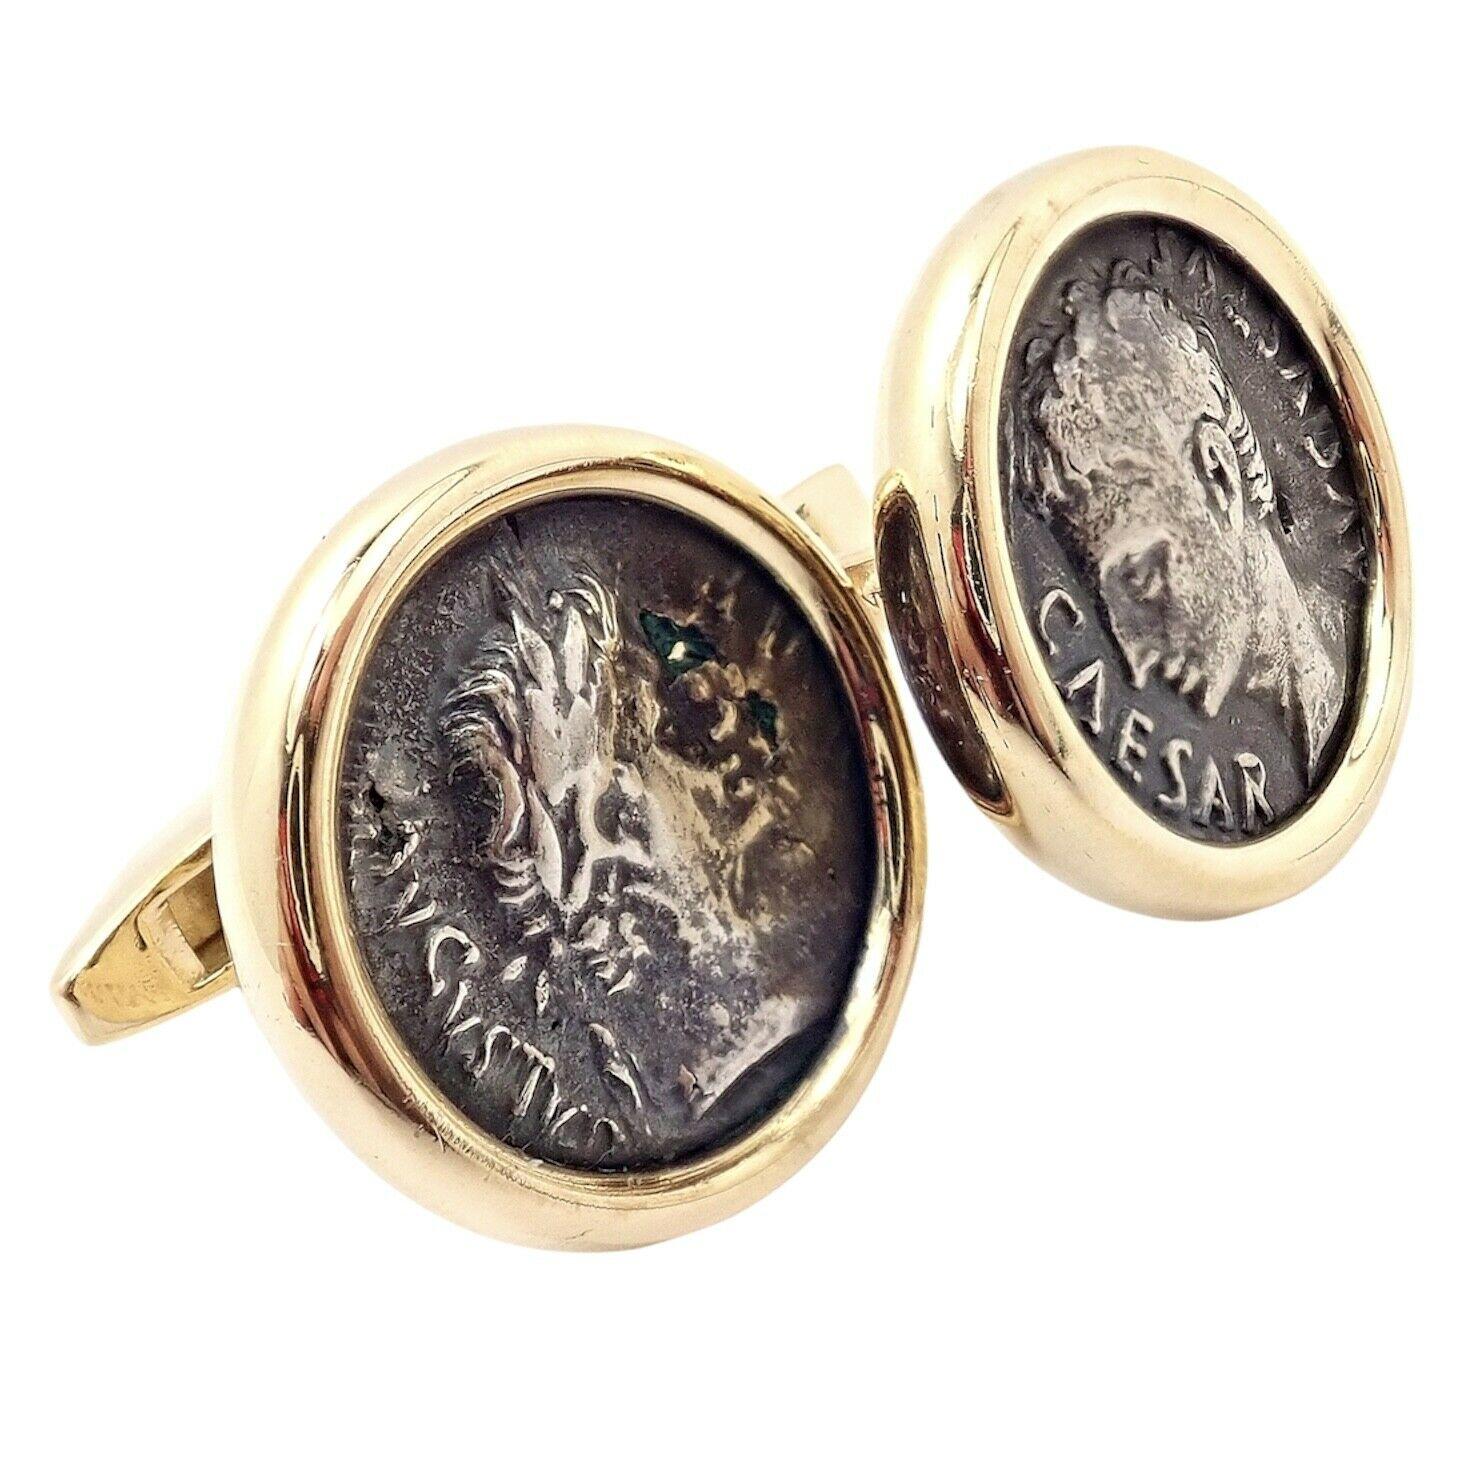 18k Yellow Gold Ancient Coin Cufflinks by Bulgari. 
Measurements: 21.5mm x 21.75mm
Coins: 2x Ancient Coins - 
Caesar Augustus Octavianus 43 BC 14 AD
Weight: 31.4 grams
Stamped Hallmarks: Bvlgari 750
*Free Shipping within the United States*
YOUR